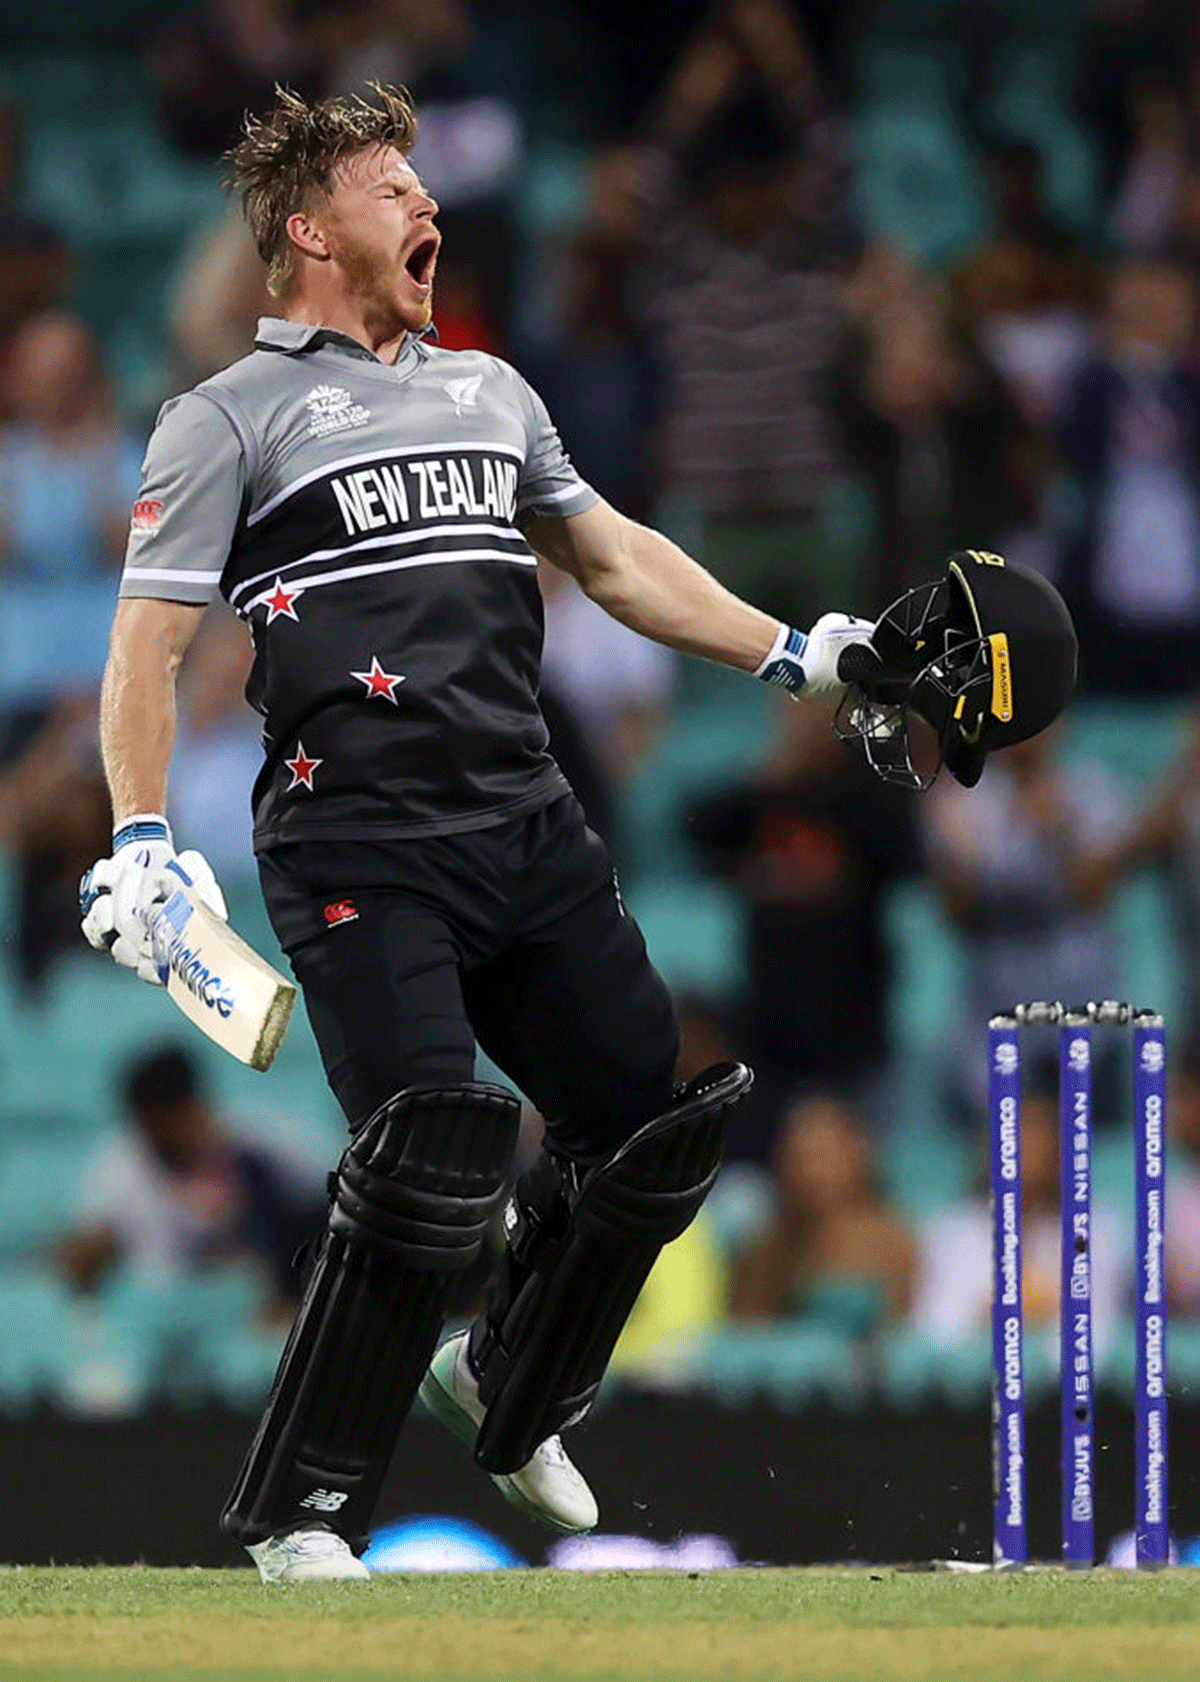 New Zealand's Glenn Phillips scoring a century during the T20 World Cup match against Sri Lanka, at Sydney Cricket Ground, on Saturday.